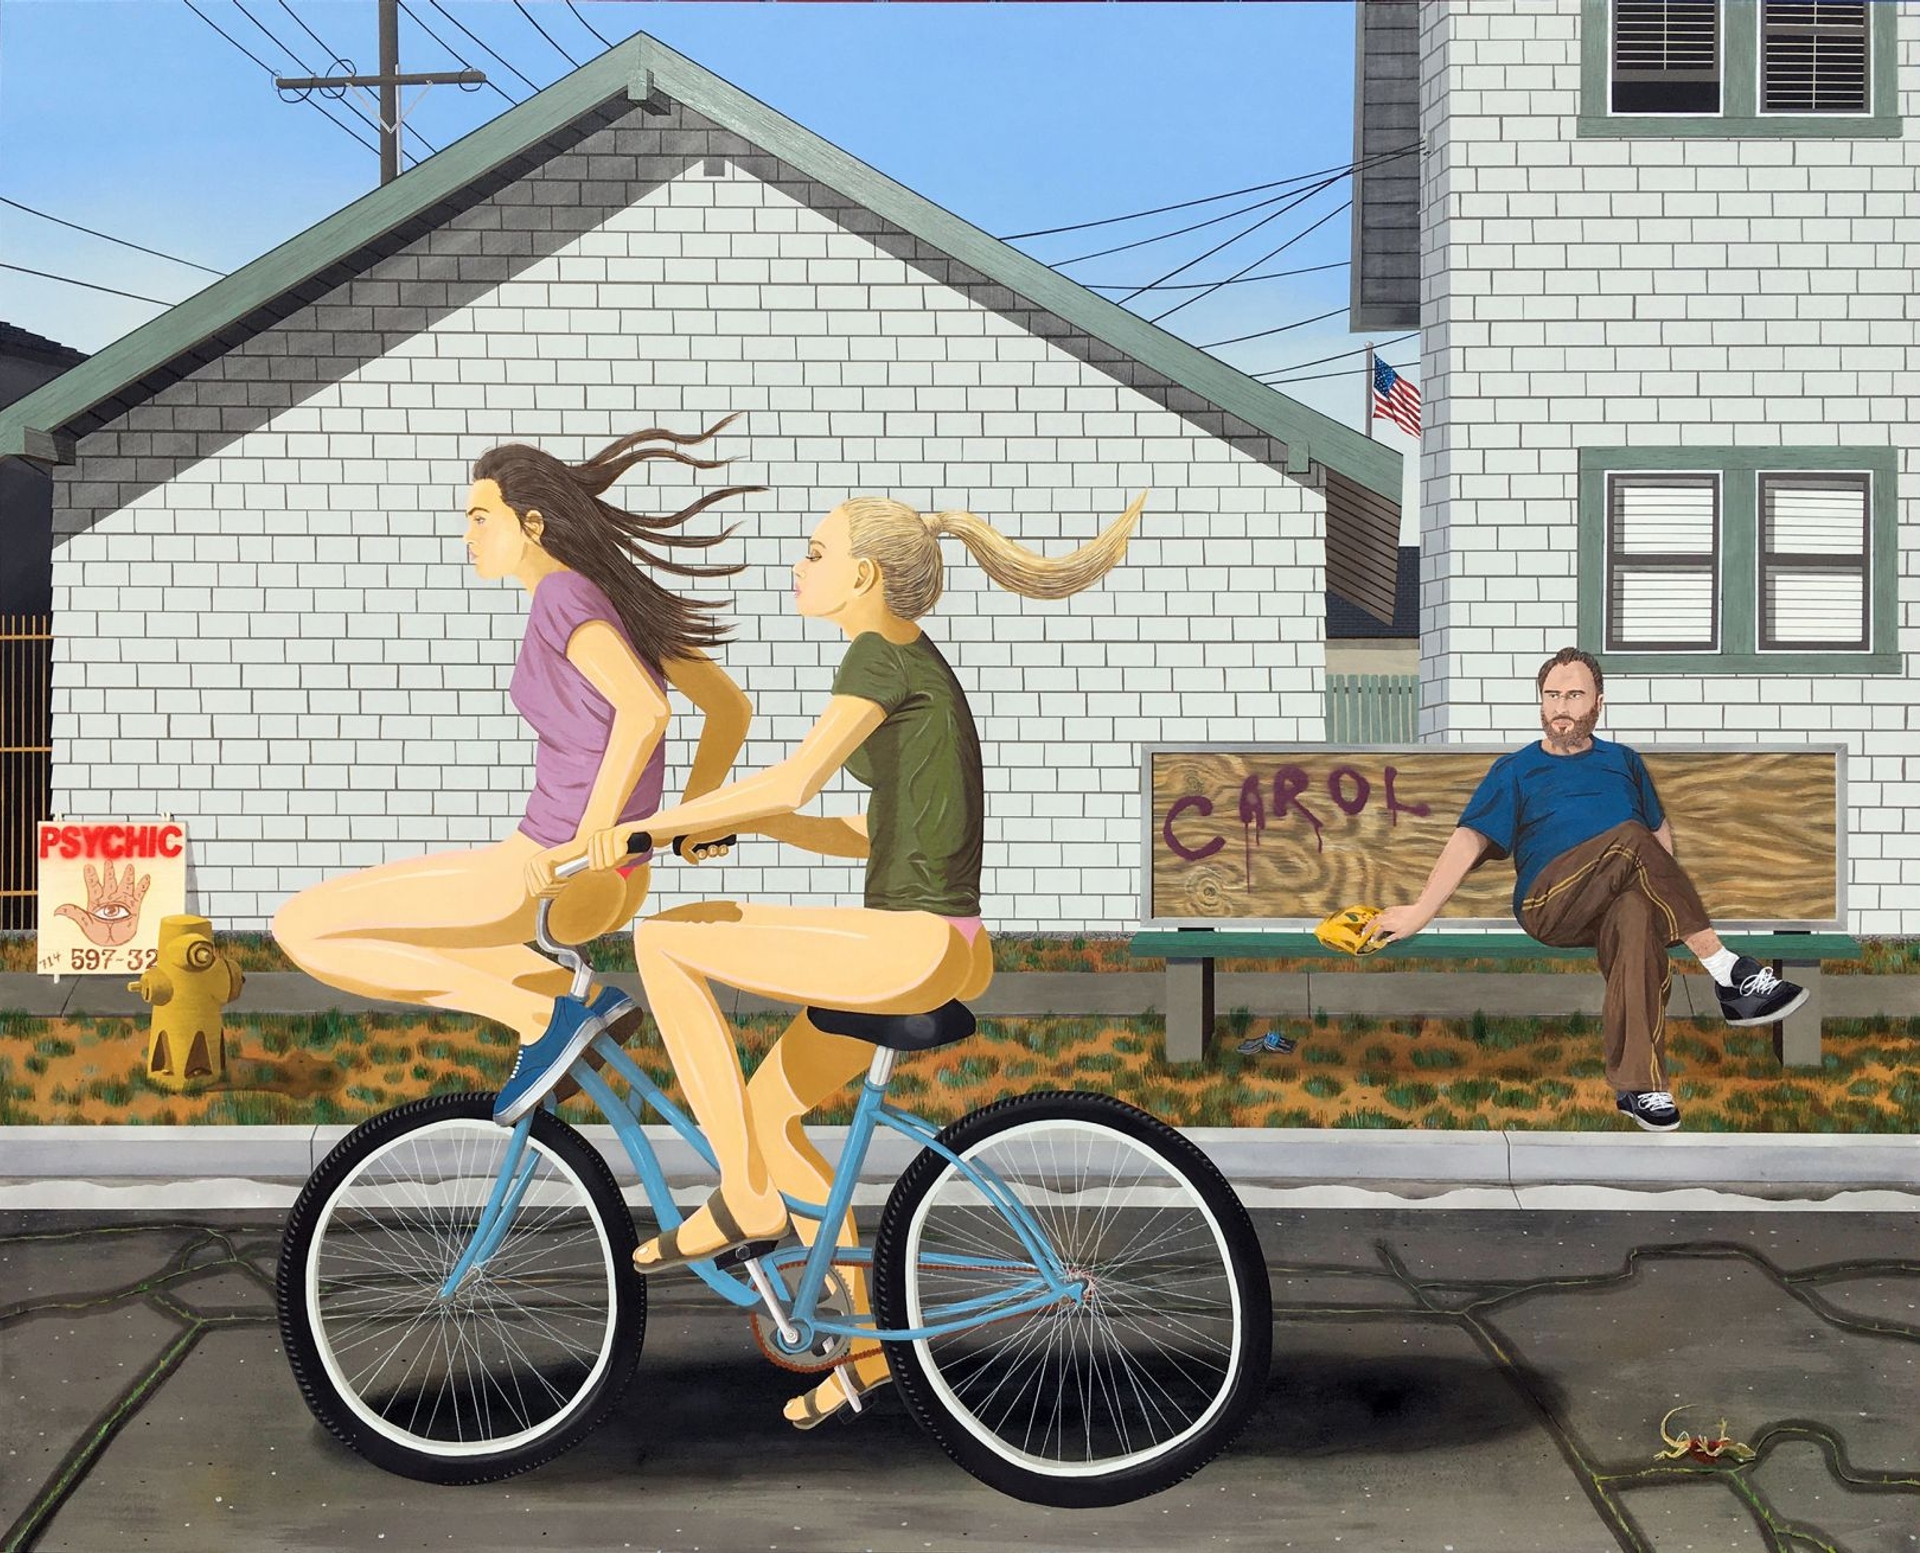 Ed Templeton, The Spring Cycle, 2020. Courtesy of the artist and Roberts Projects, Los Angeles.